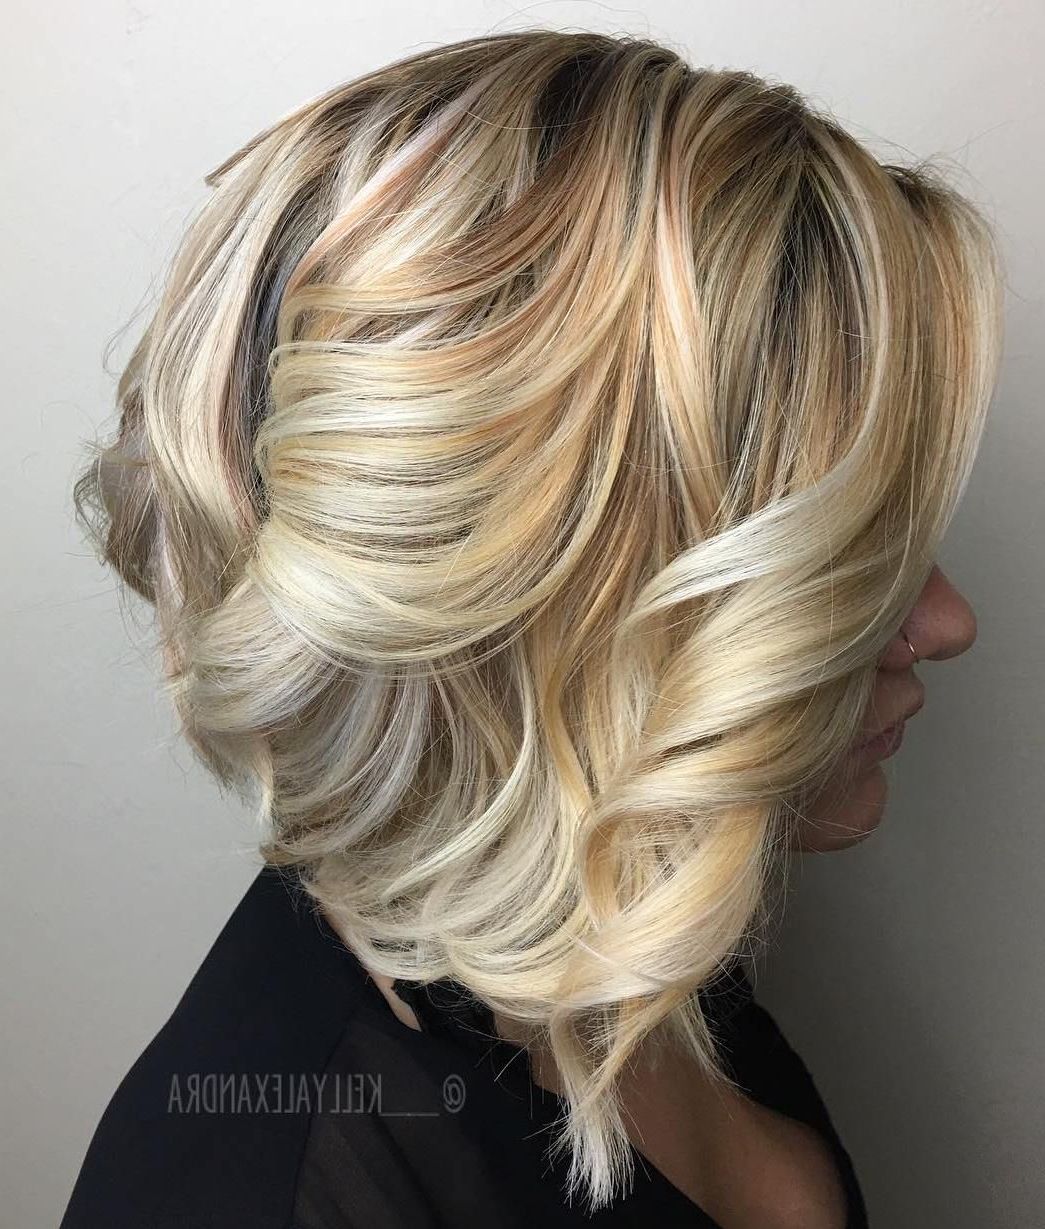 25 Special Occasion Hairstyles | Blonde Bob Hairstyles, Curly Blonde With Short Hairstyles For Special Occasions (View 14 of 25)